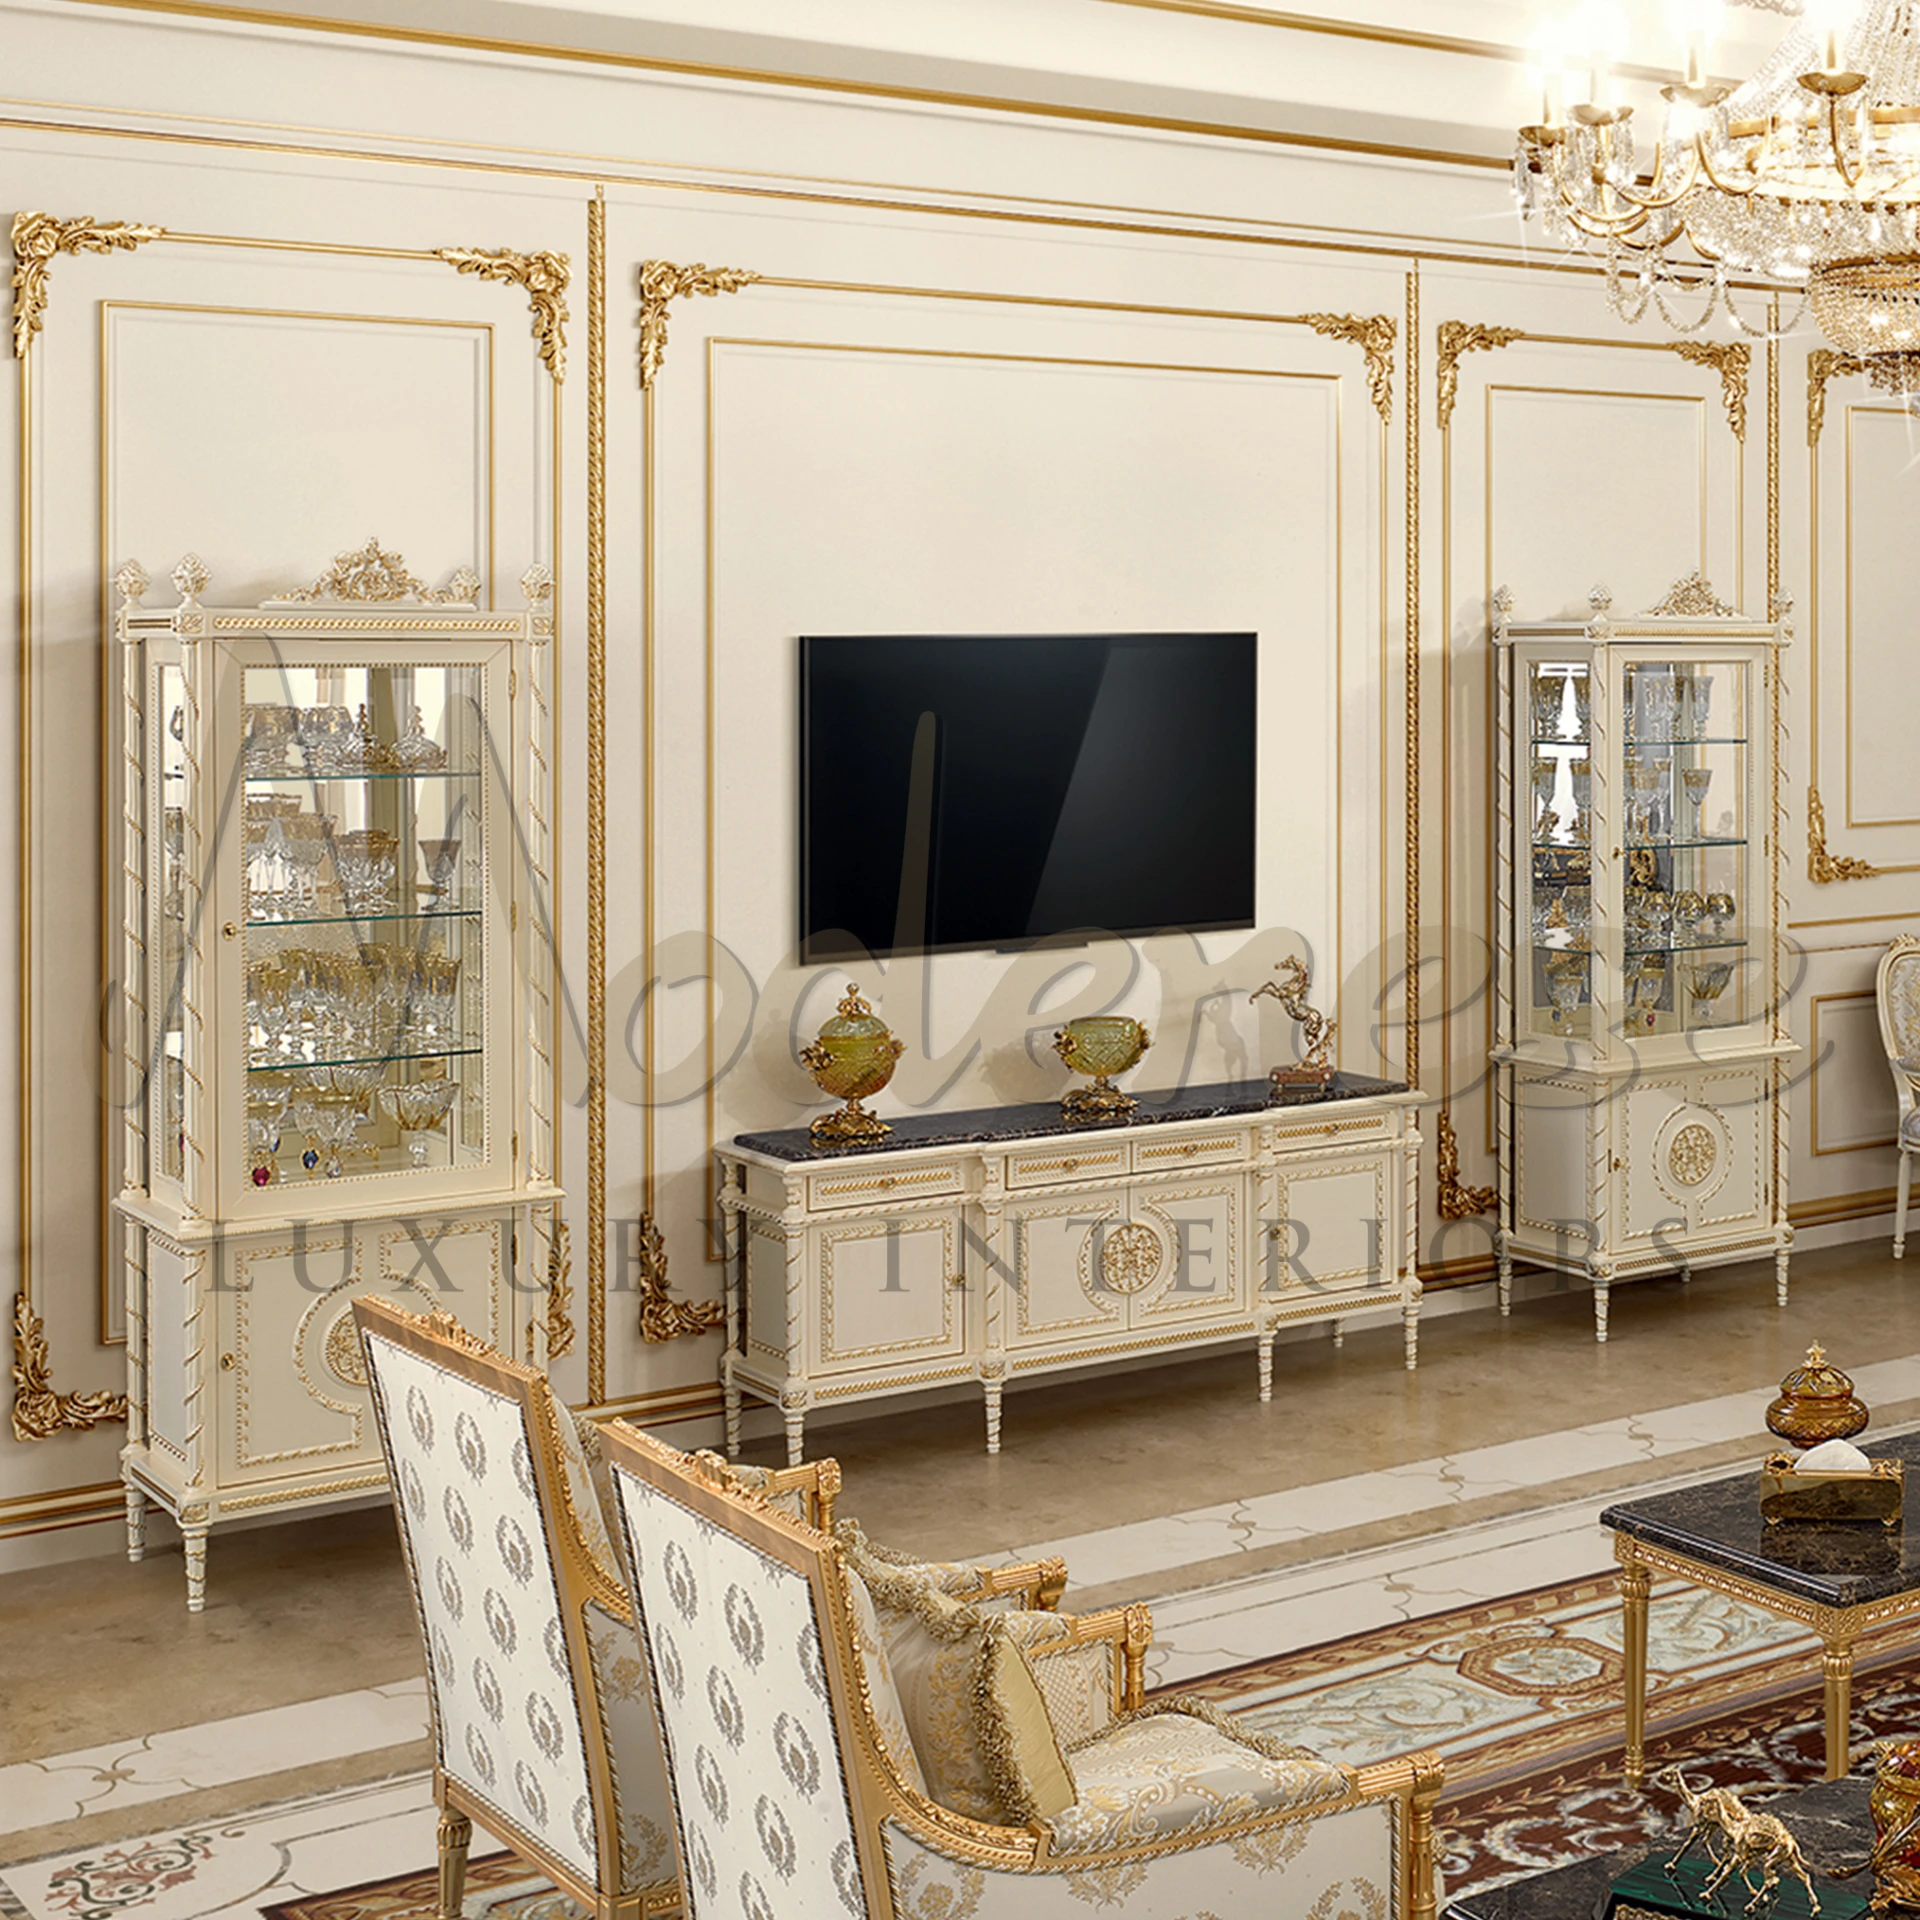 Stylish living room with white and gold furniture, crystal chandelier, and decorative white wooden cabinets